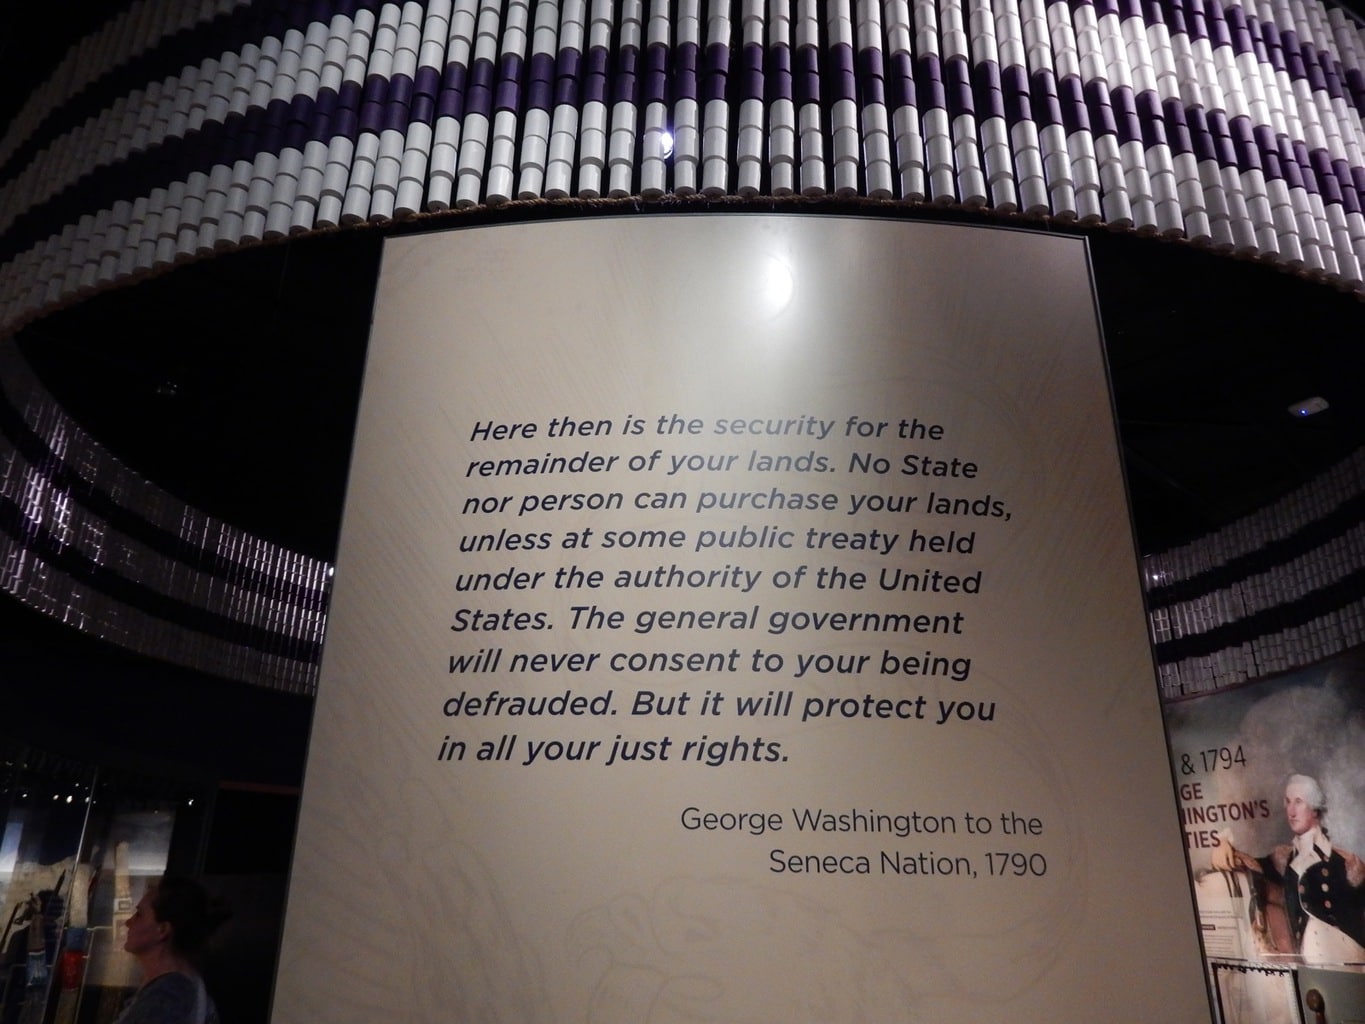 George Washington Letter to Seneca Nation 1790 - National Museum of American Indian DC